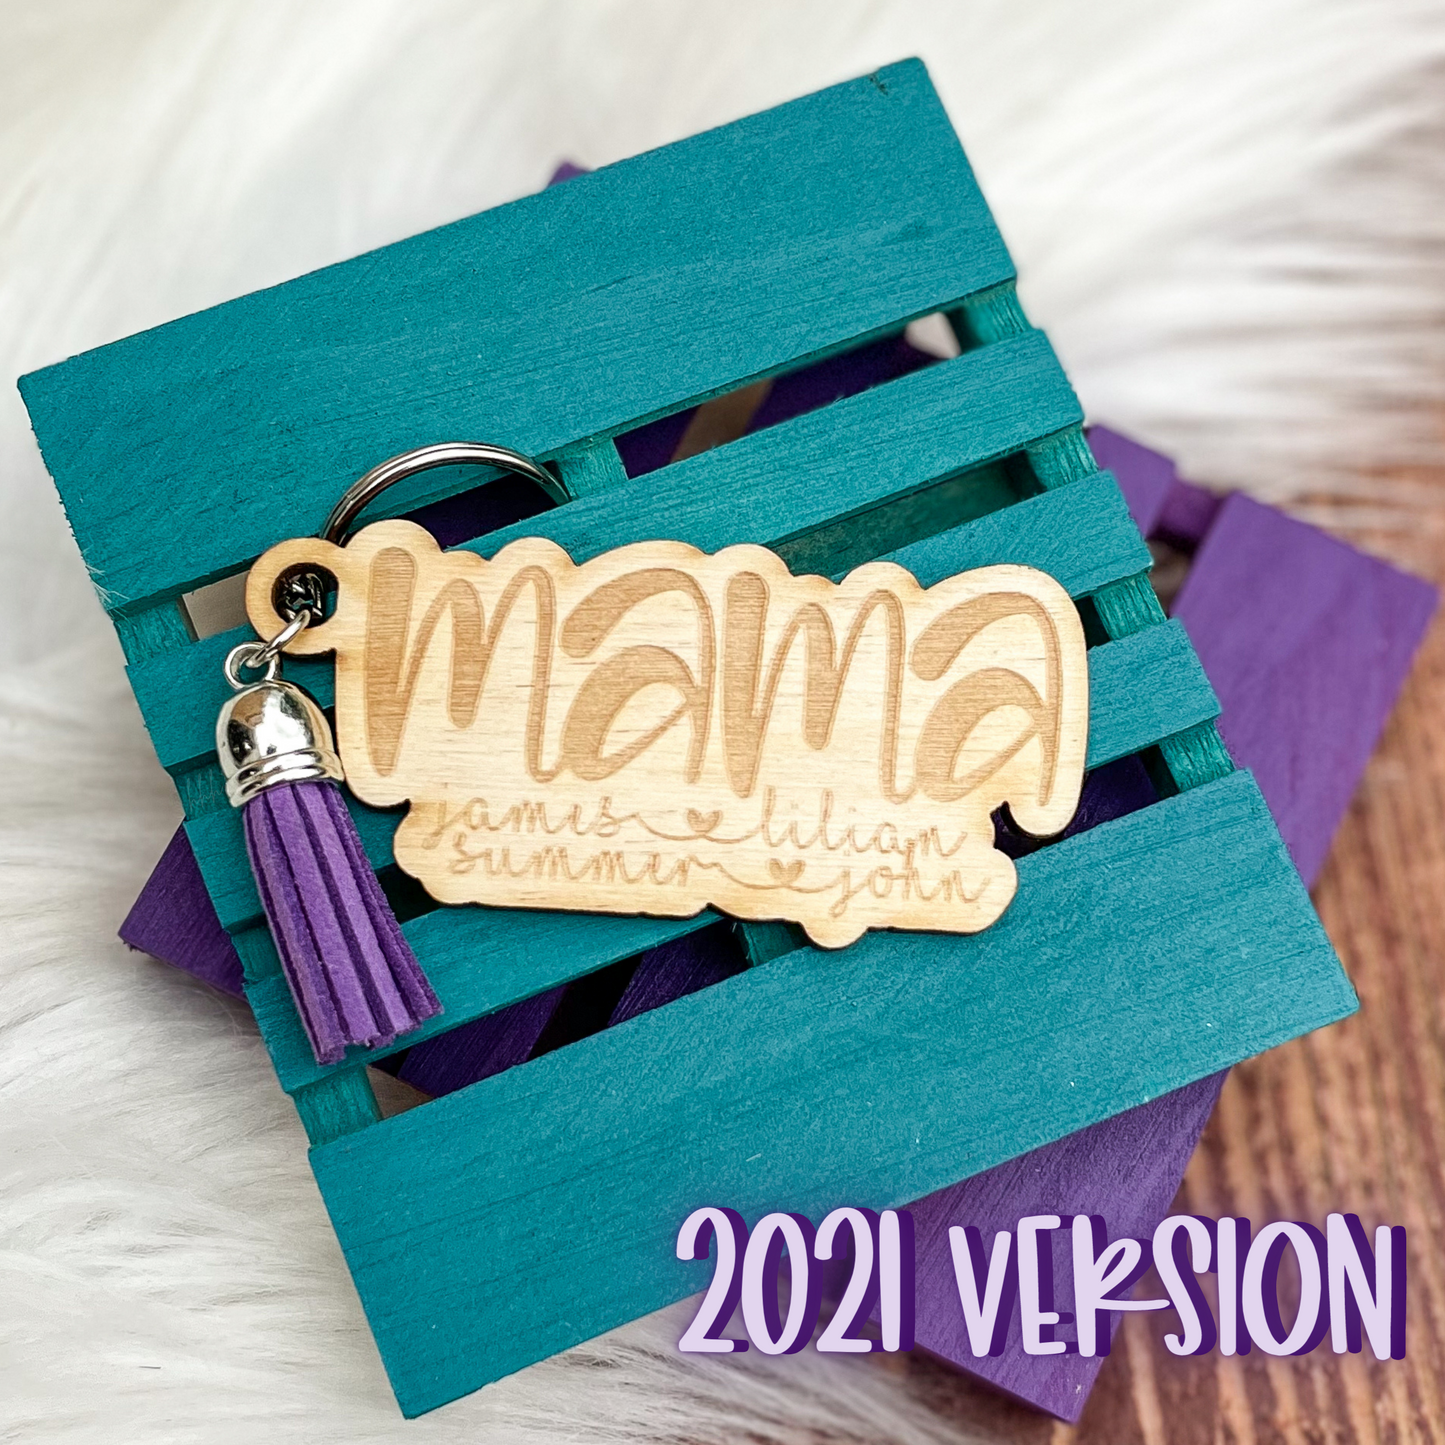 BEST SELLER: Personalized ENGRAVED Wood Keychains (with names)